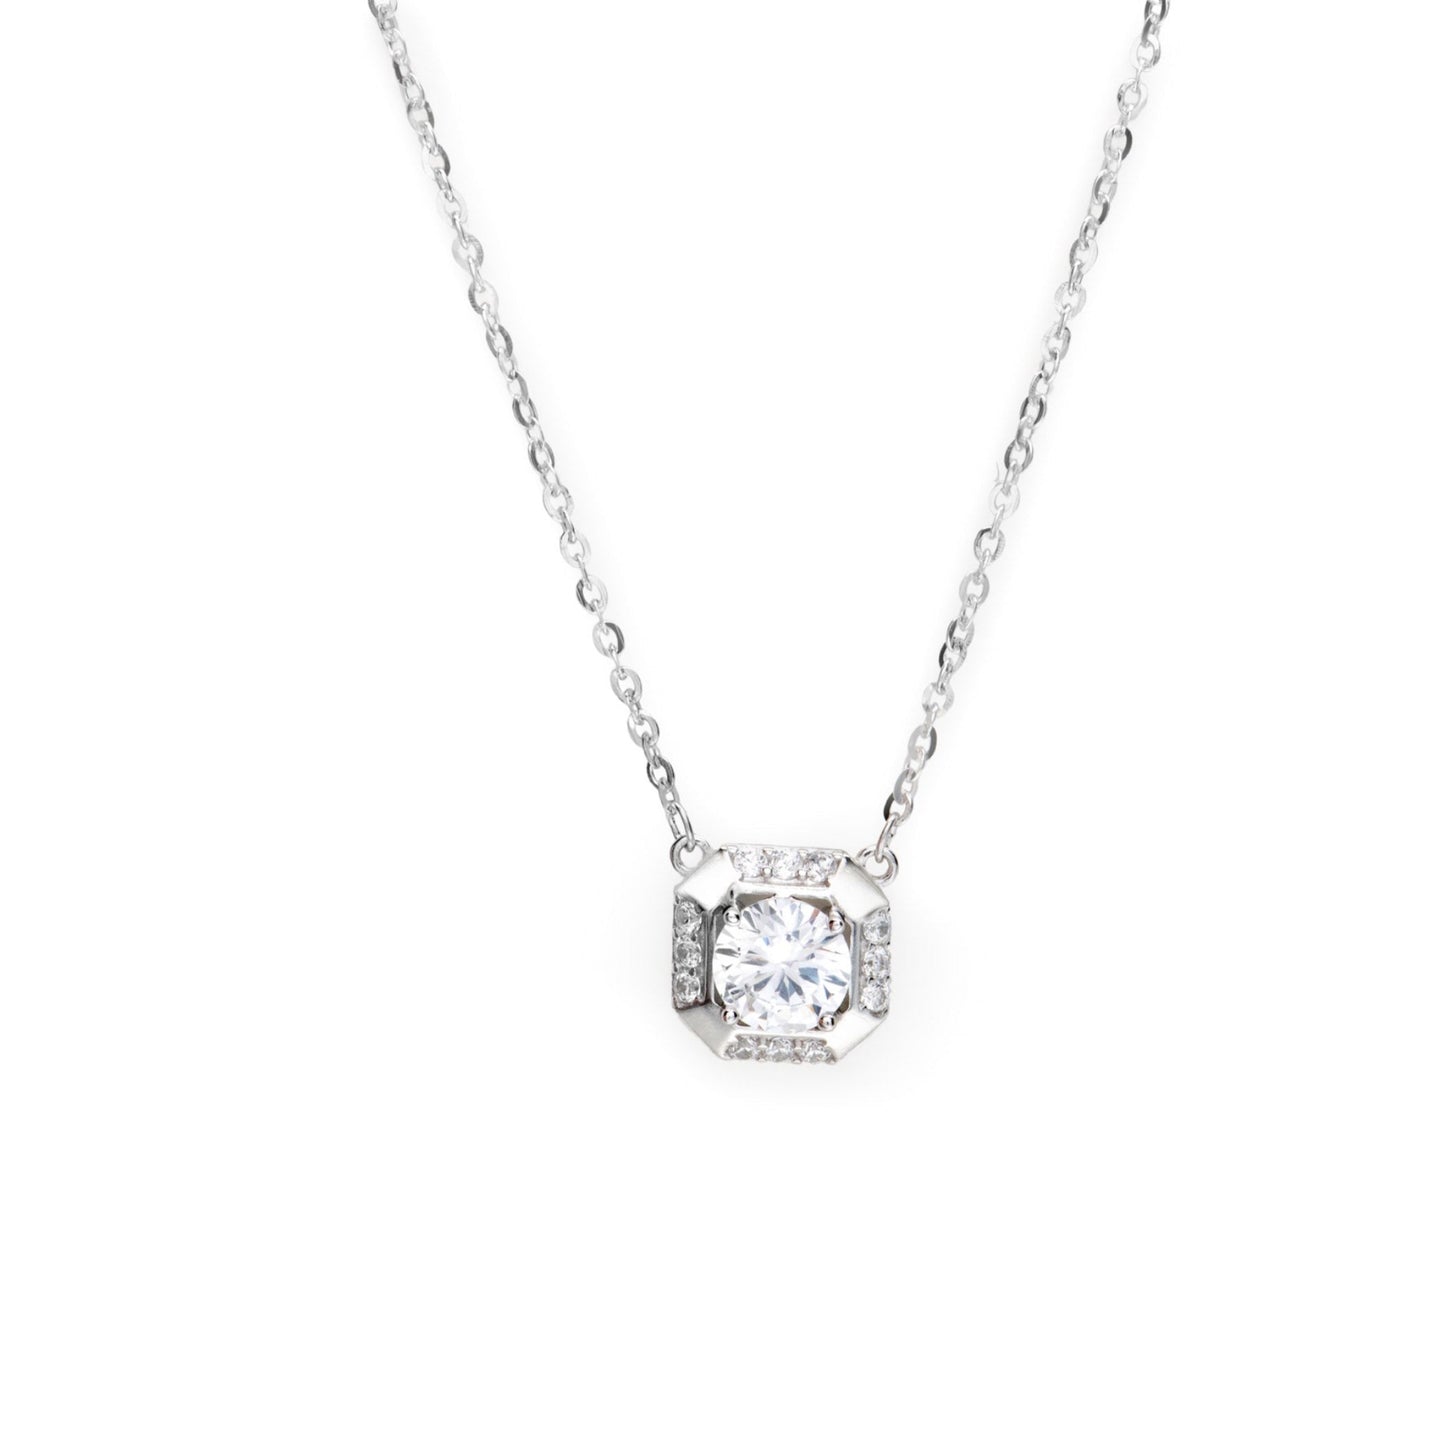 Diamond Stud Earrings and Necklace